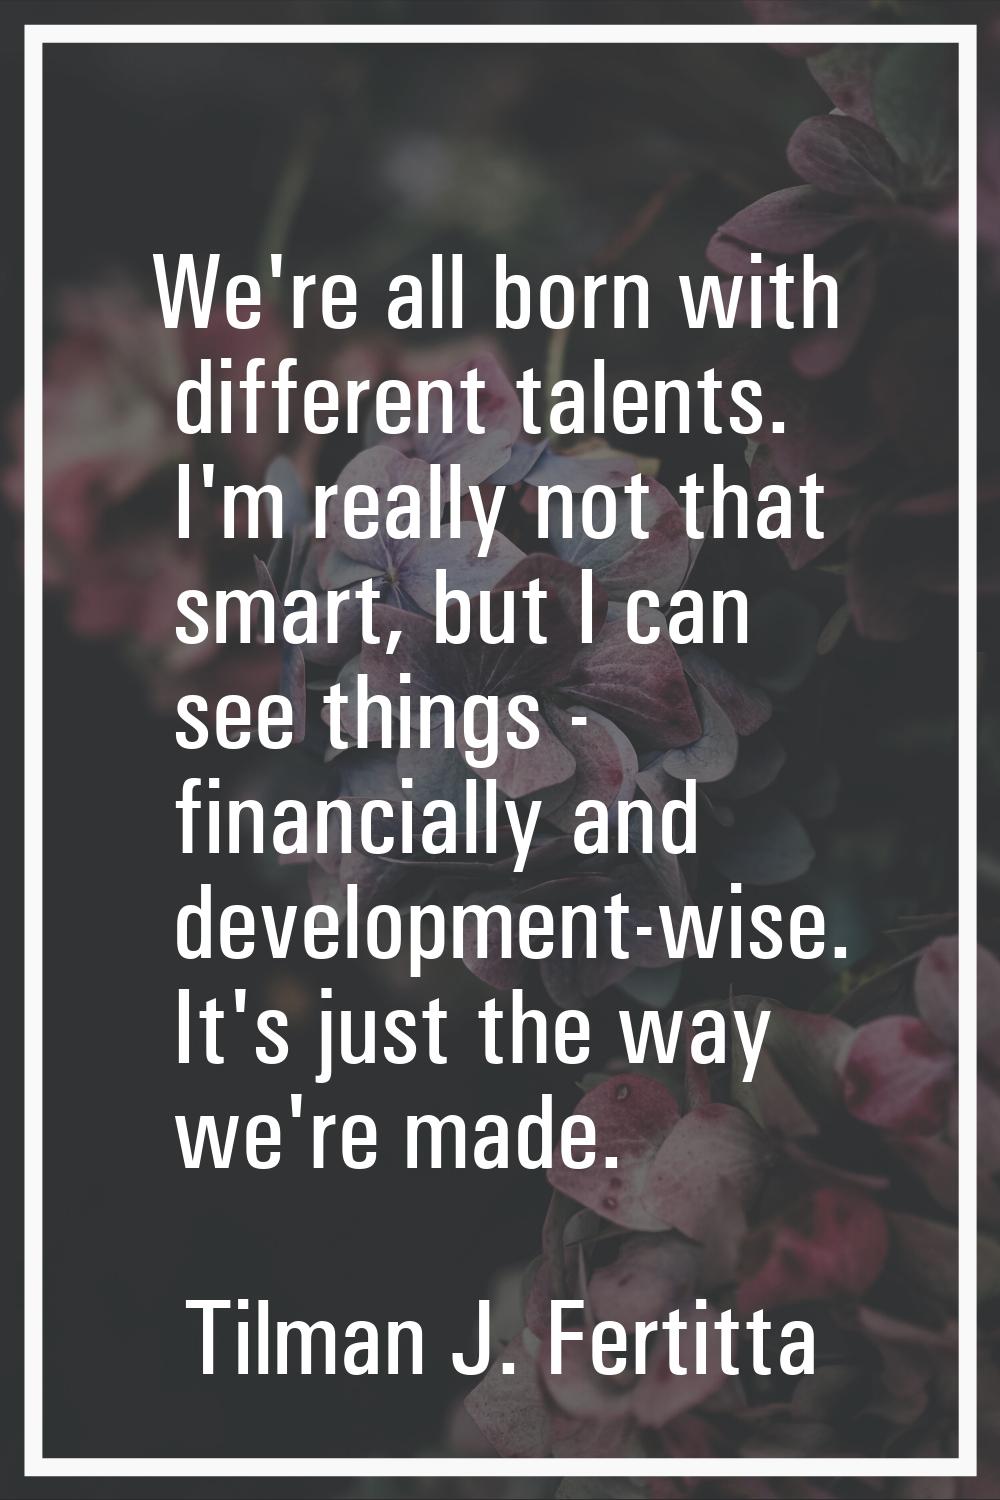 We're all born with different talents. I'm really not that smart, but I can see things - financiall